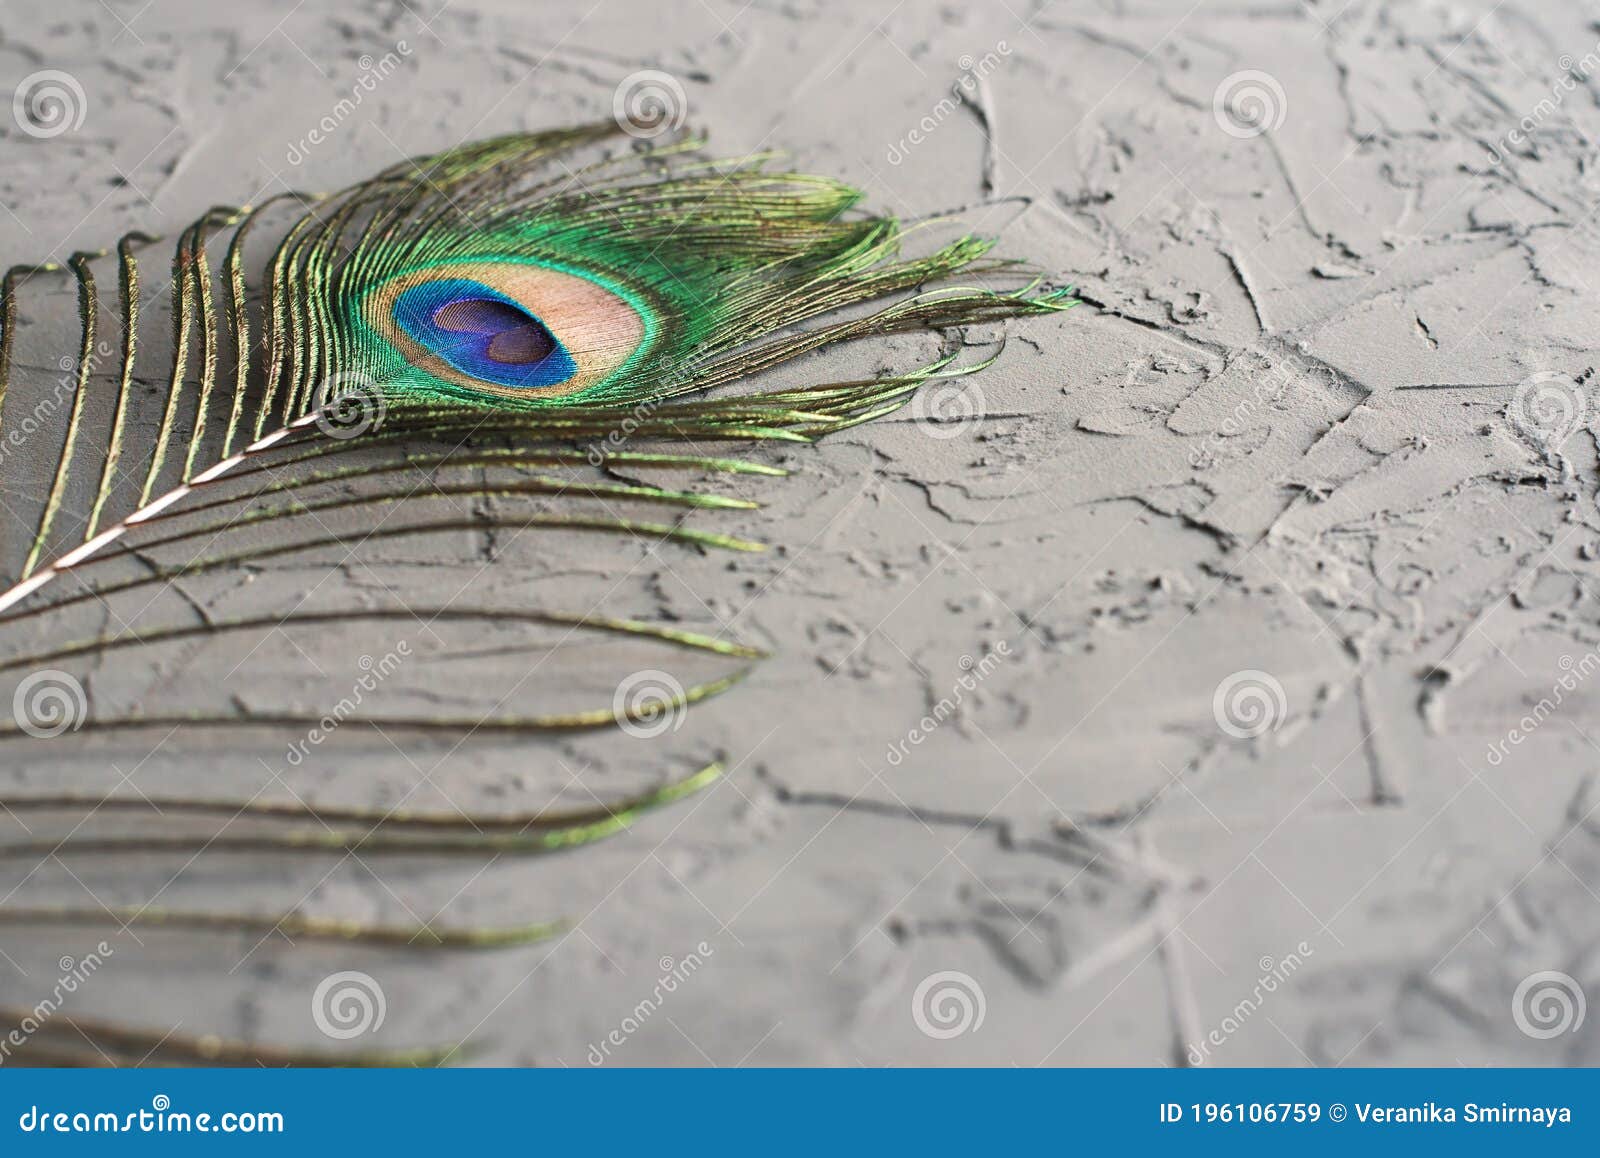 Background with Peacock Feather on Concrete Surface Stock Image - Image of  decor, surface: 196106759